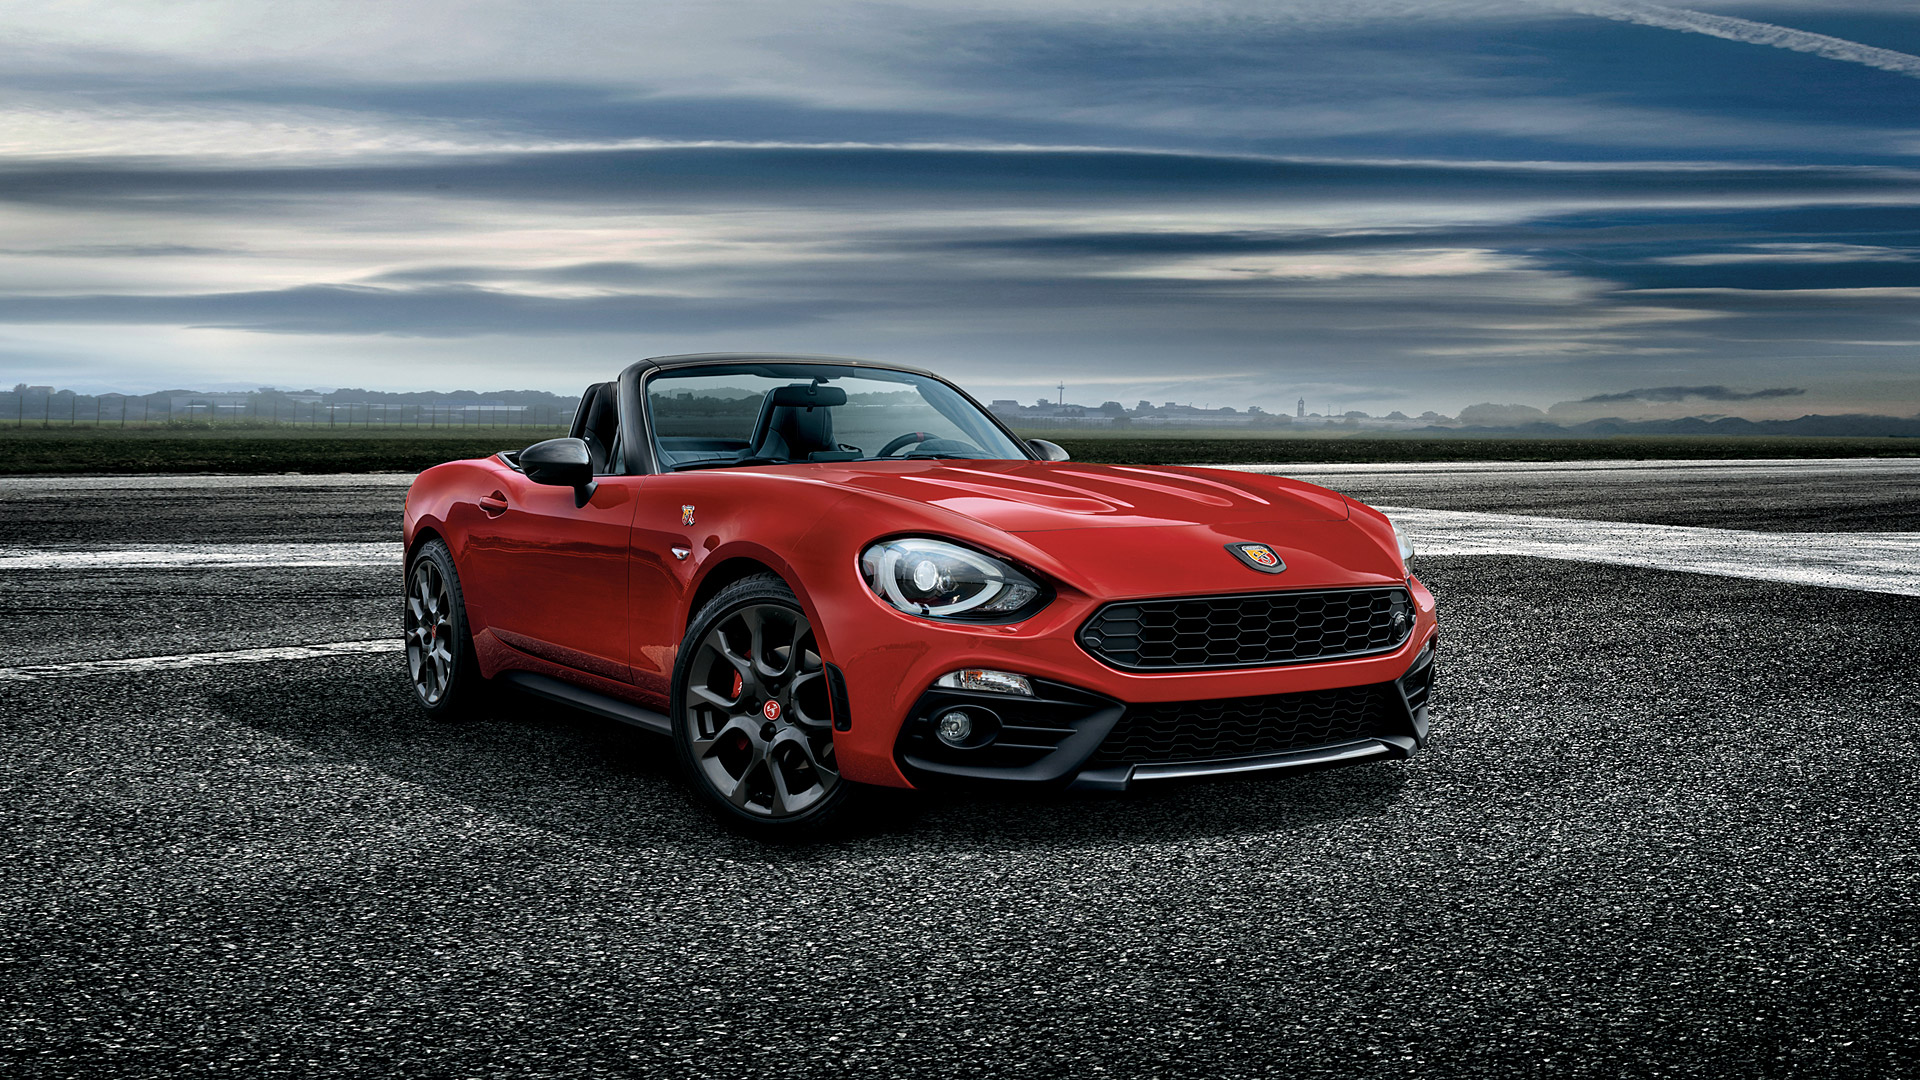 Fiat Spider Abarth Wallpaper HD Image Wsupercars